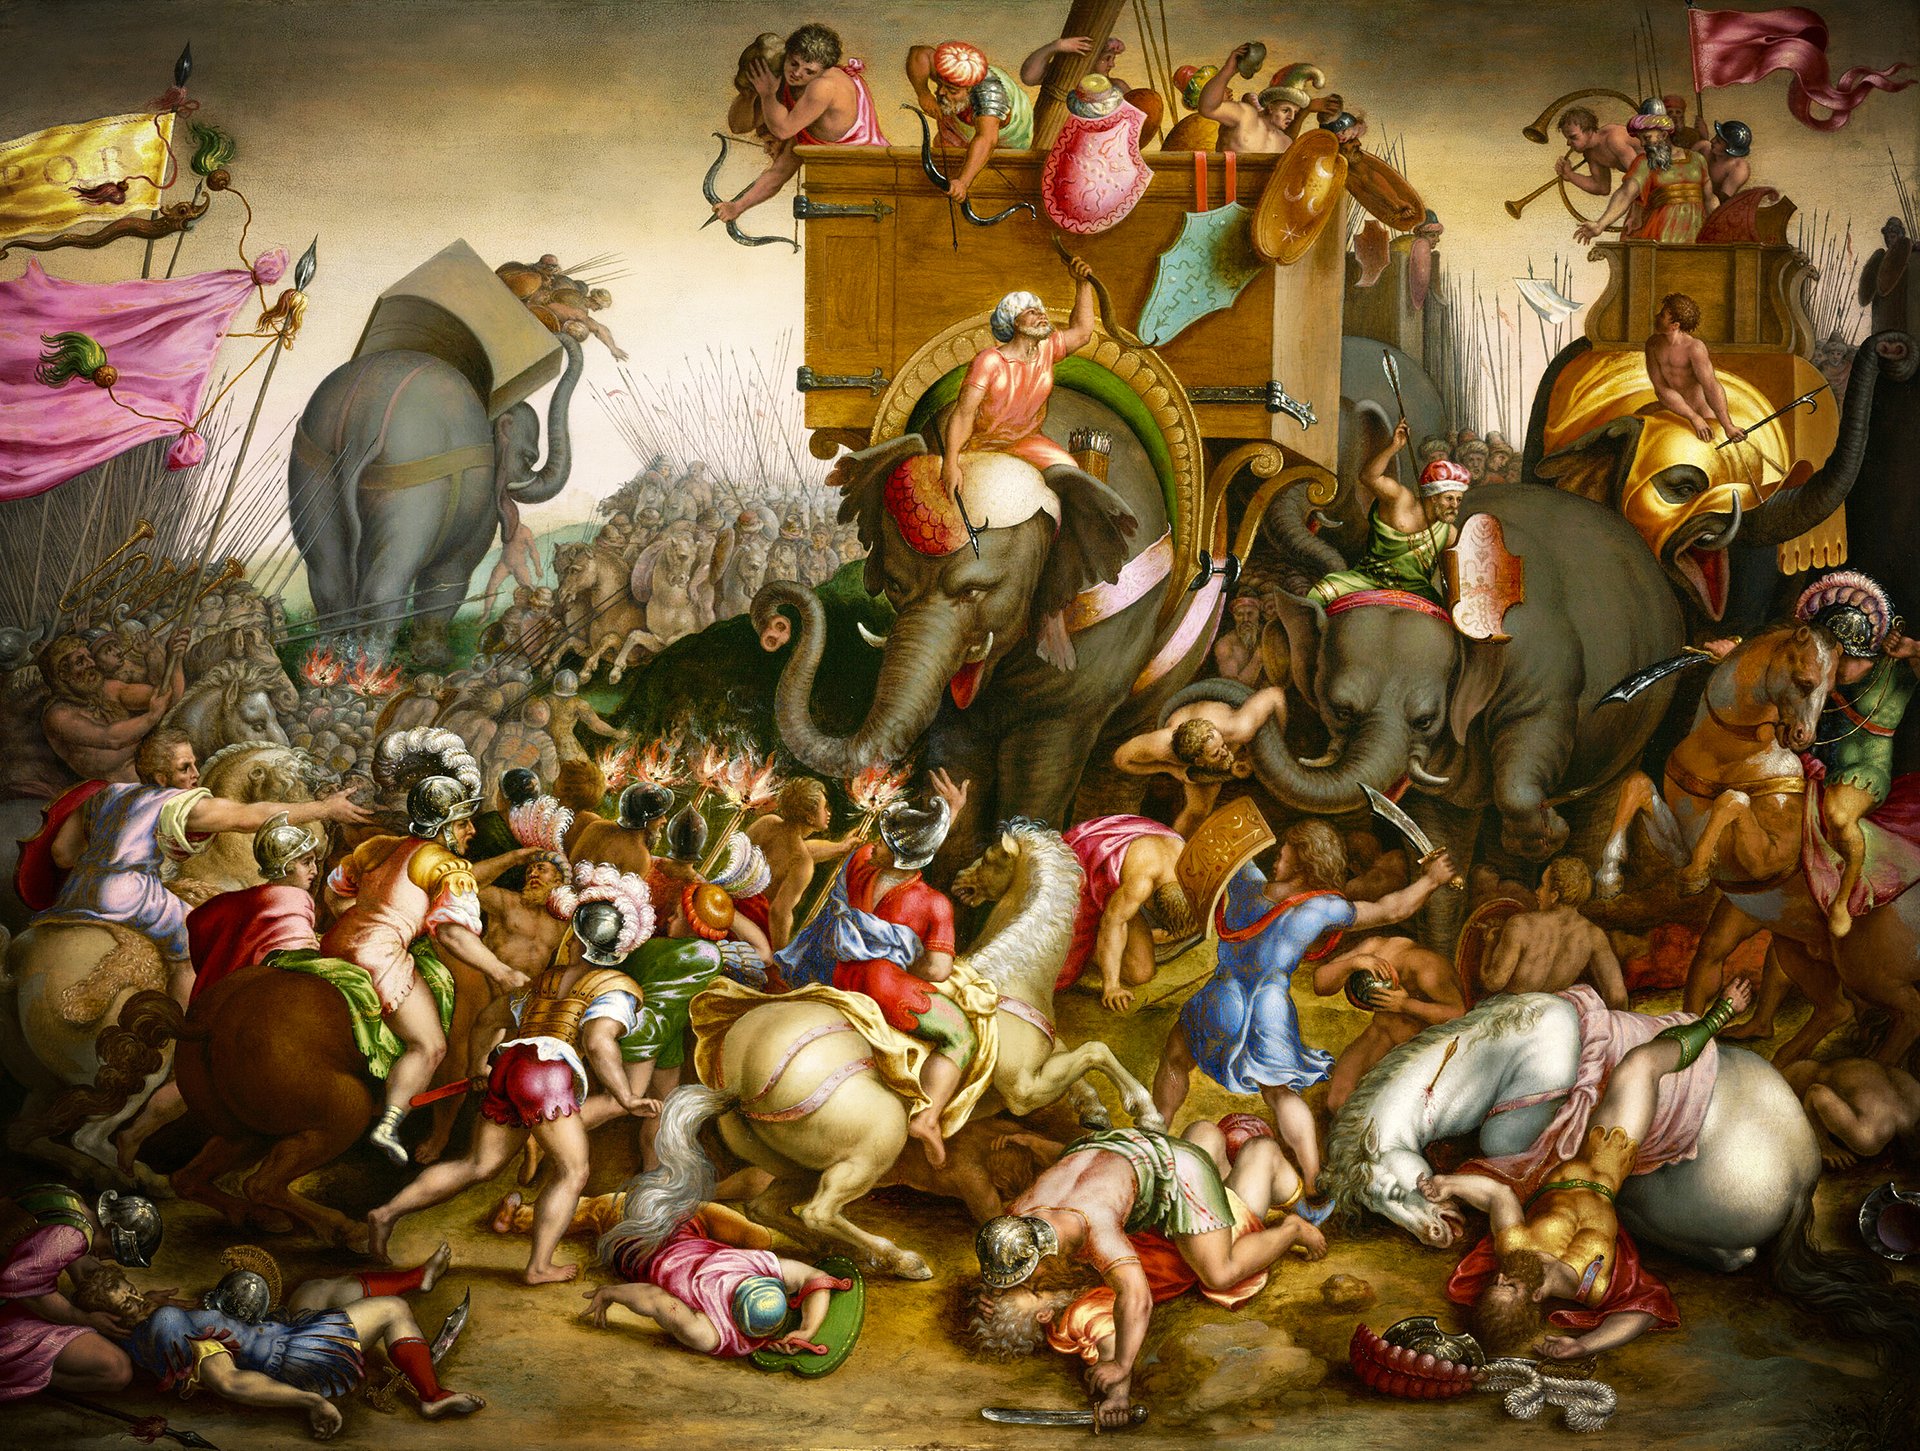 An elaborate historical painting depicting the Battle of Zama, showing the chaotic clash between Roman troops and Carthaginian forces led by Hannibal, featuring war elephants engaged in the combat.